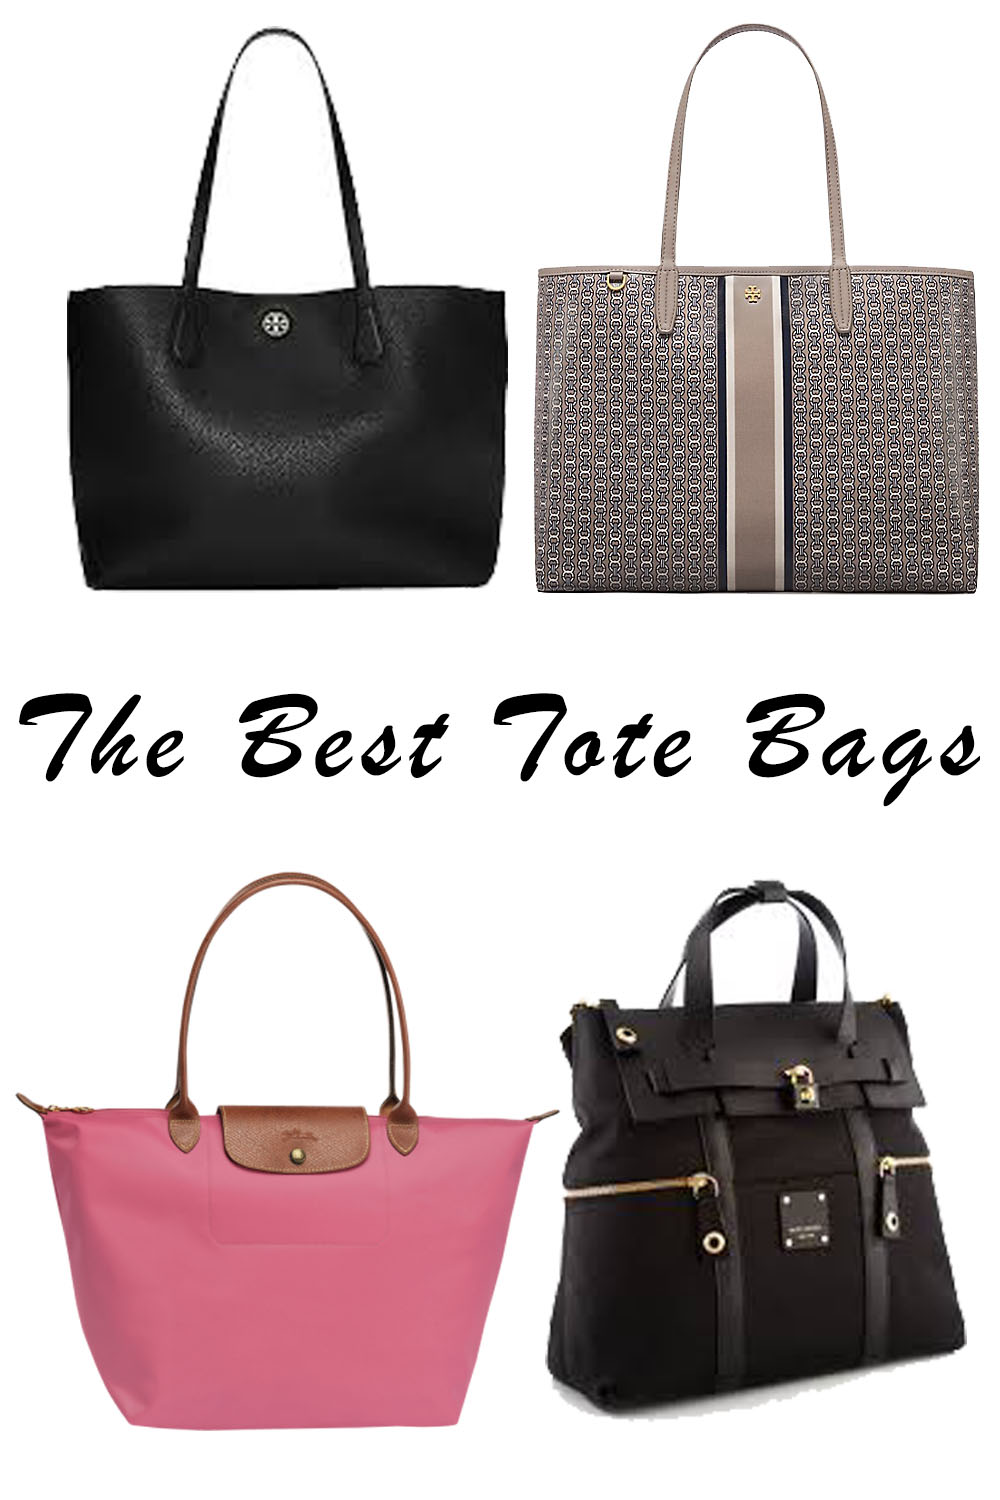 Fashion File: The Best Tote Bags for Work/School